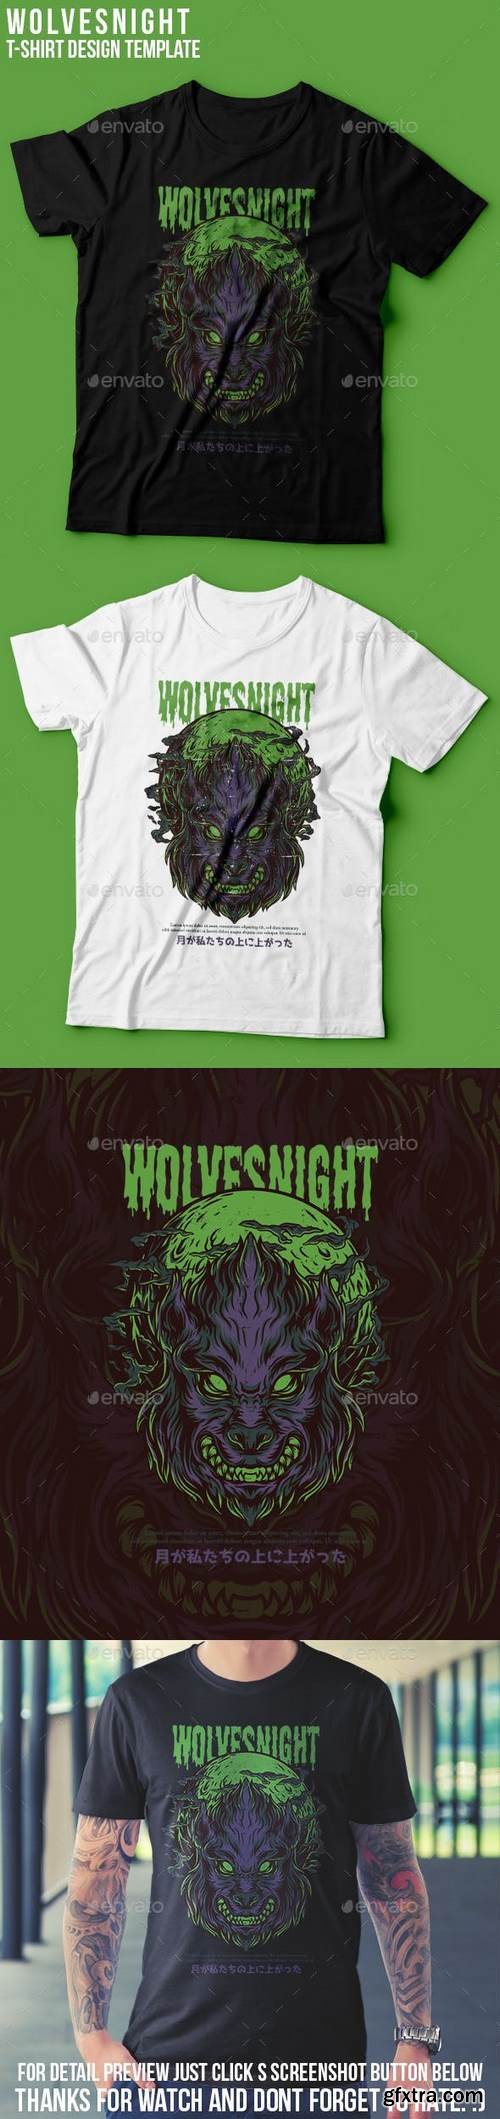 Graphicriver - Wolves Night T-Shirt Design 22939345